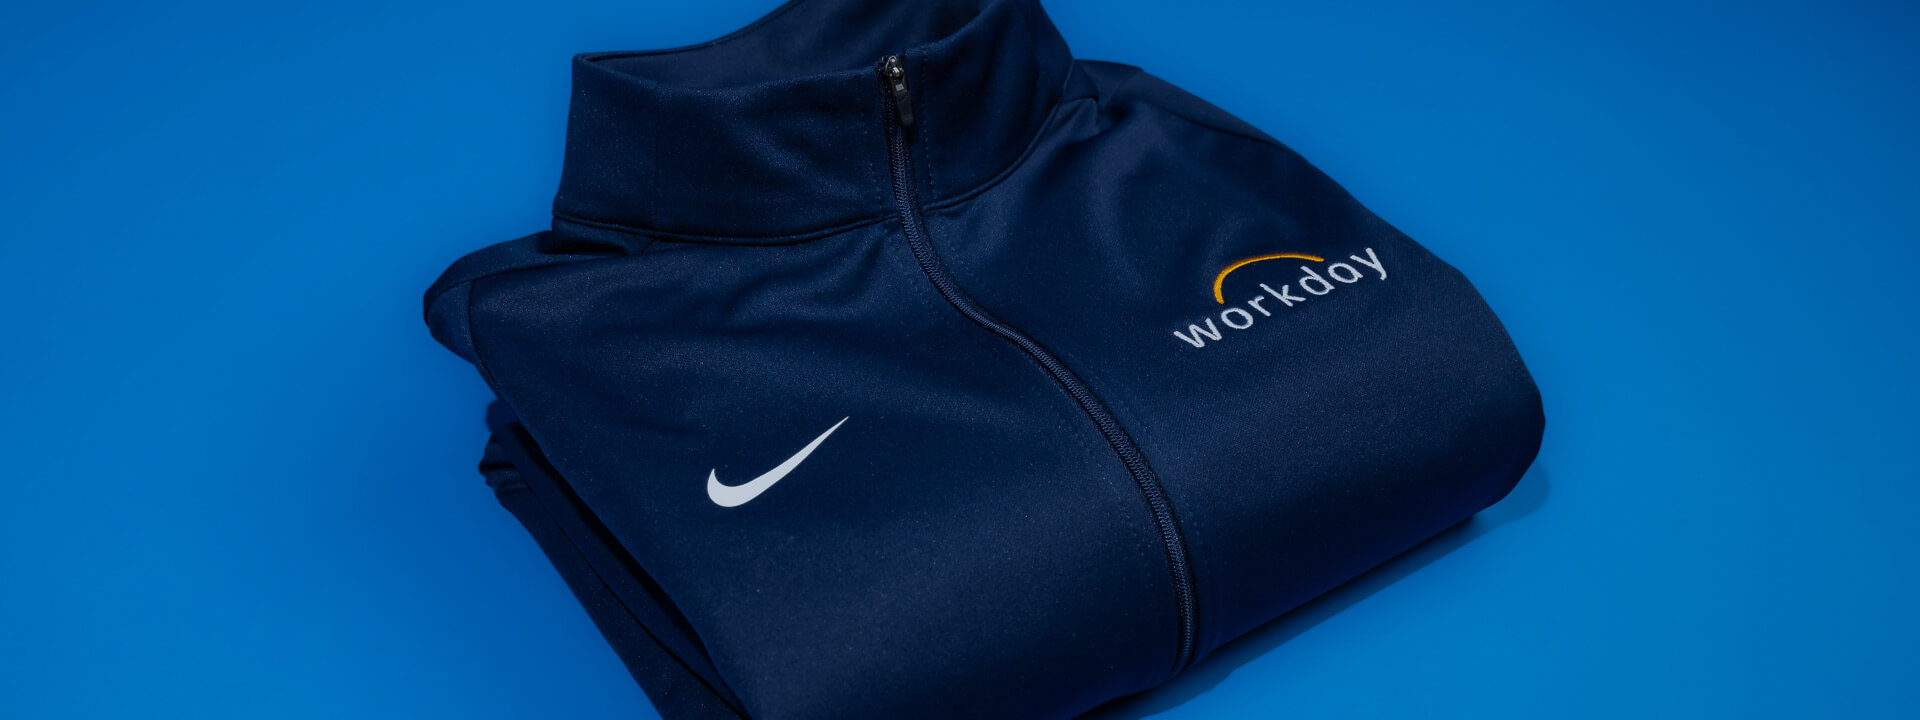 Built by Sport. Made for Work. Explore Custom Nike Tech Apparel and Company Gear.